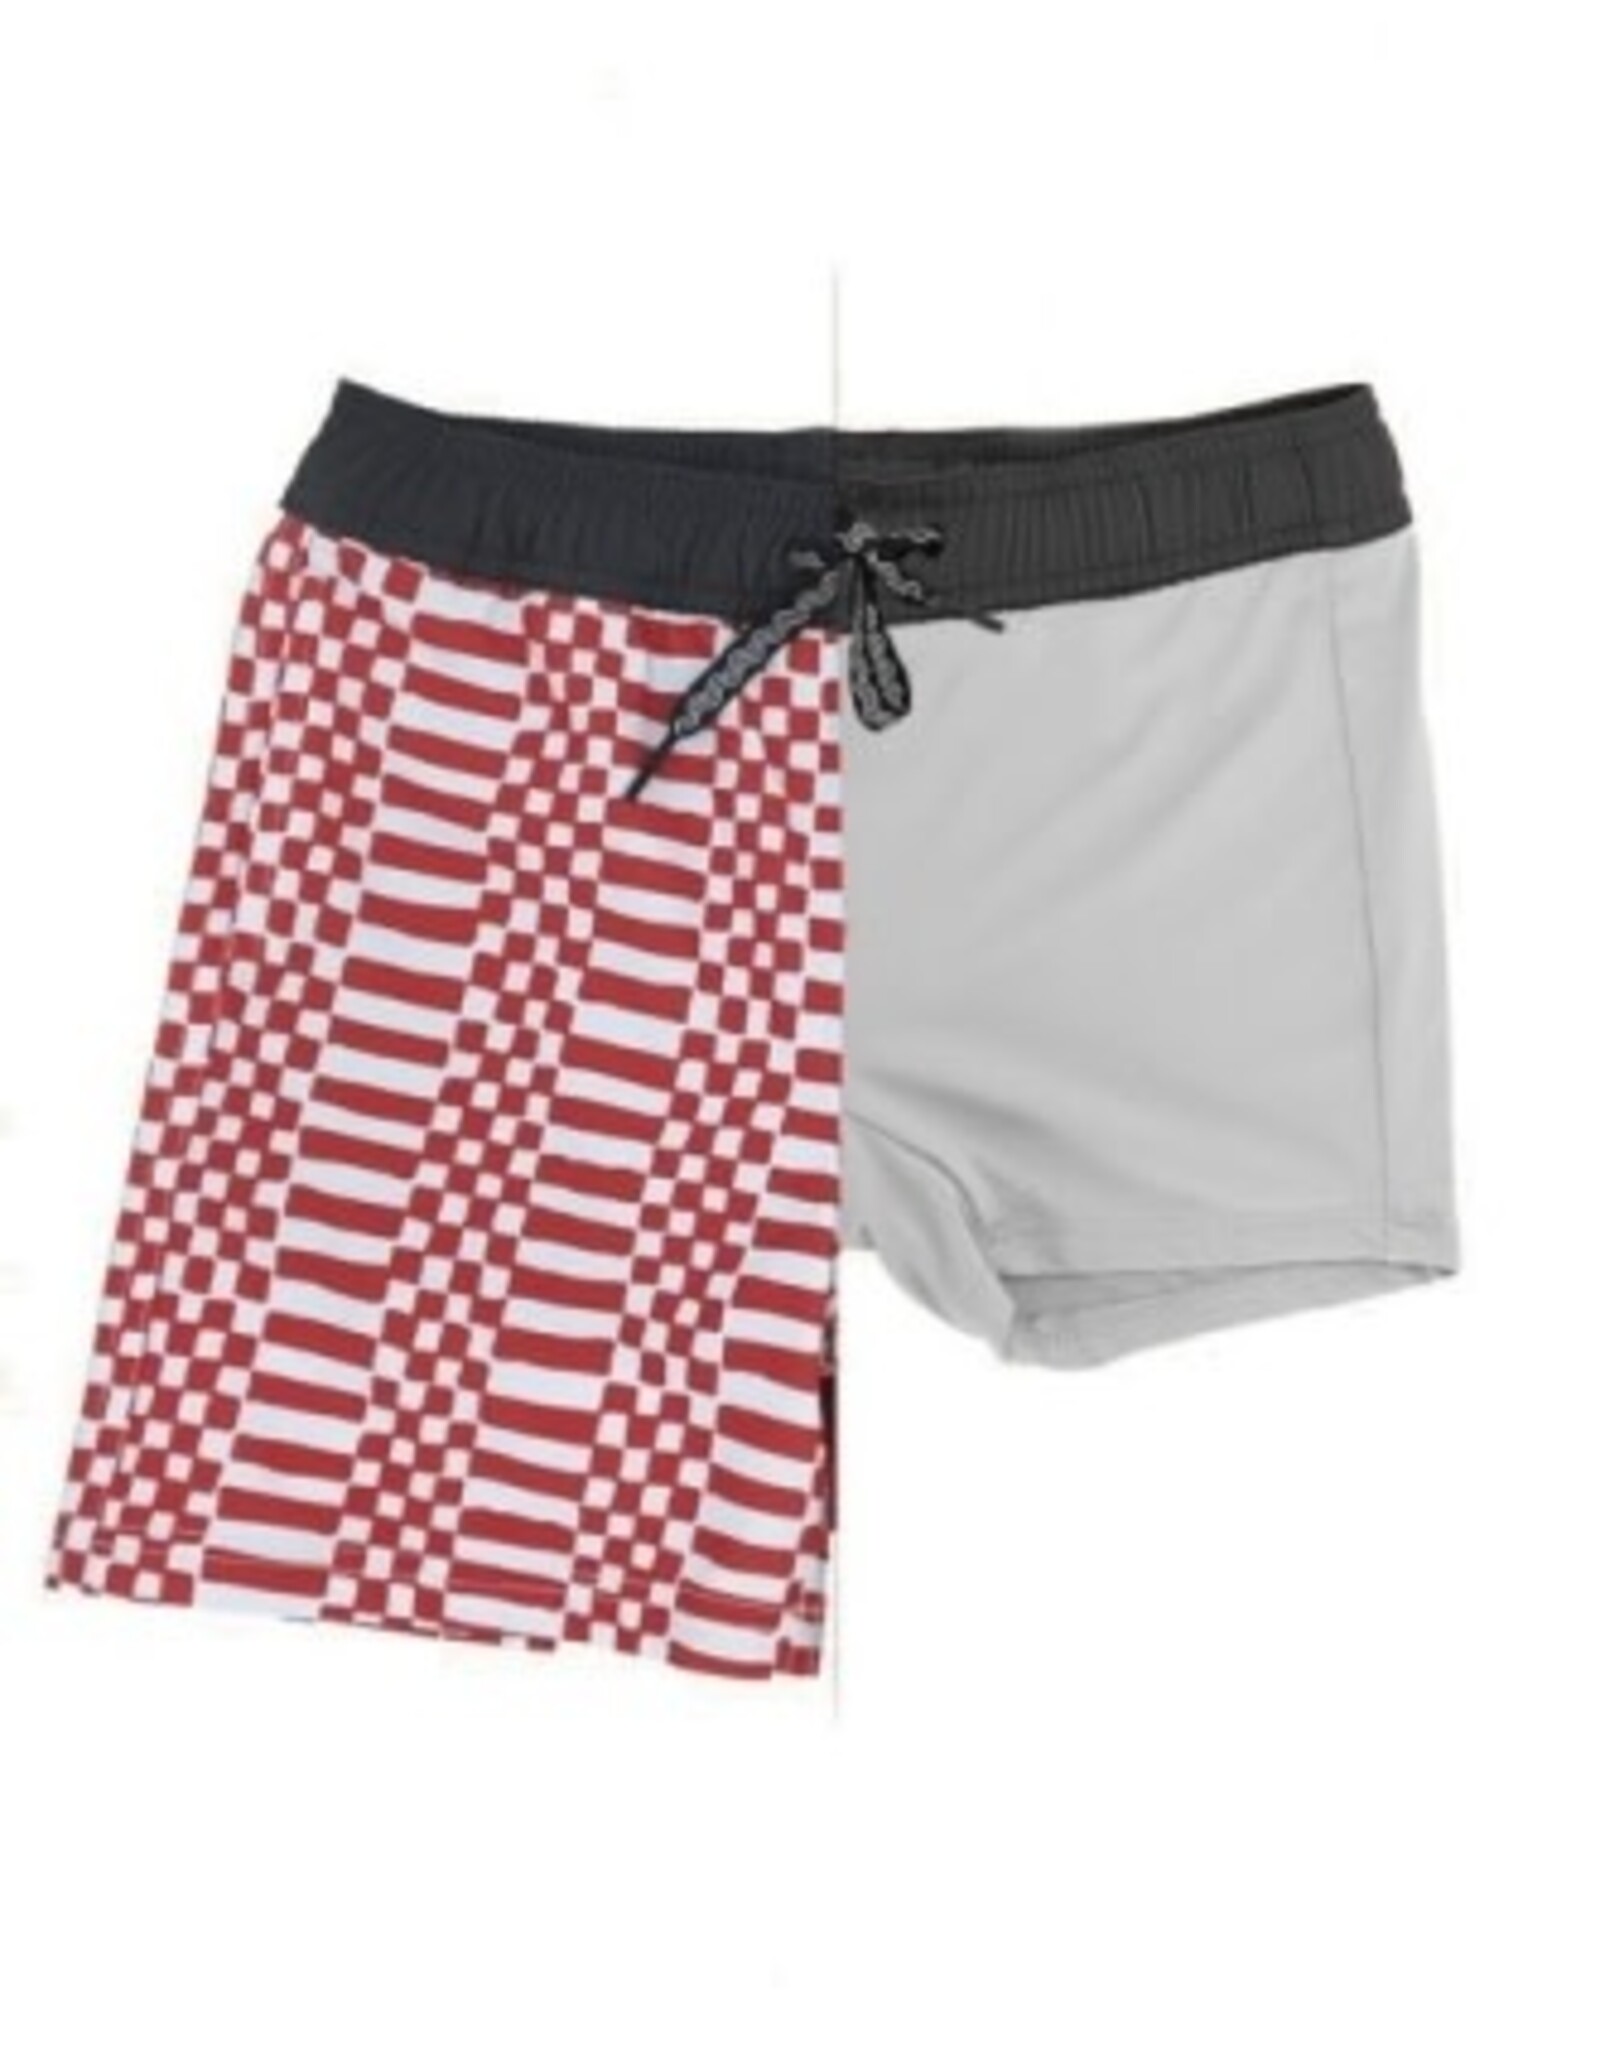 Feather 4 Arrow DOUBLE CHECK VOLLEY TRUNK